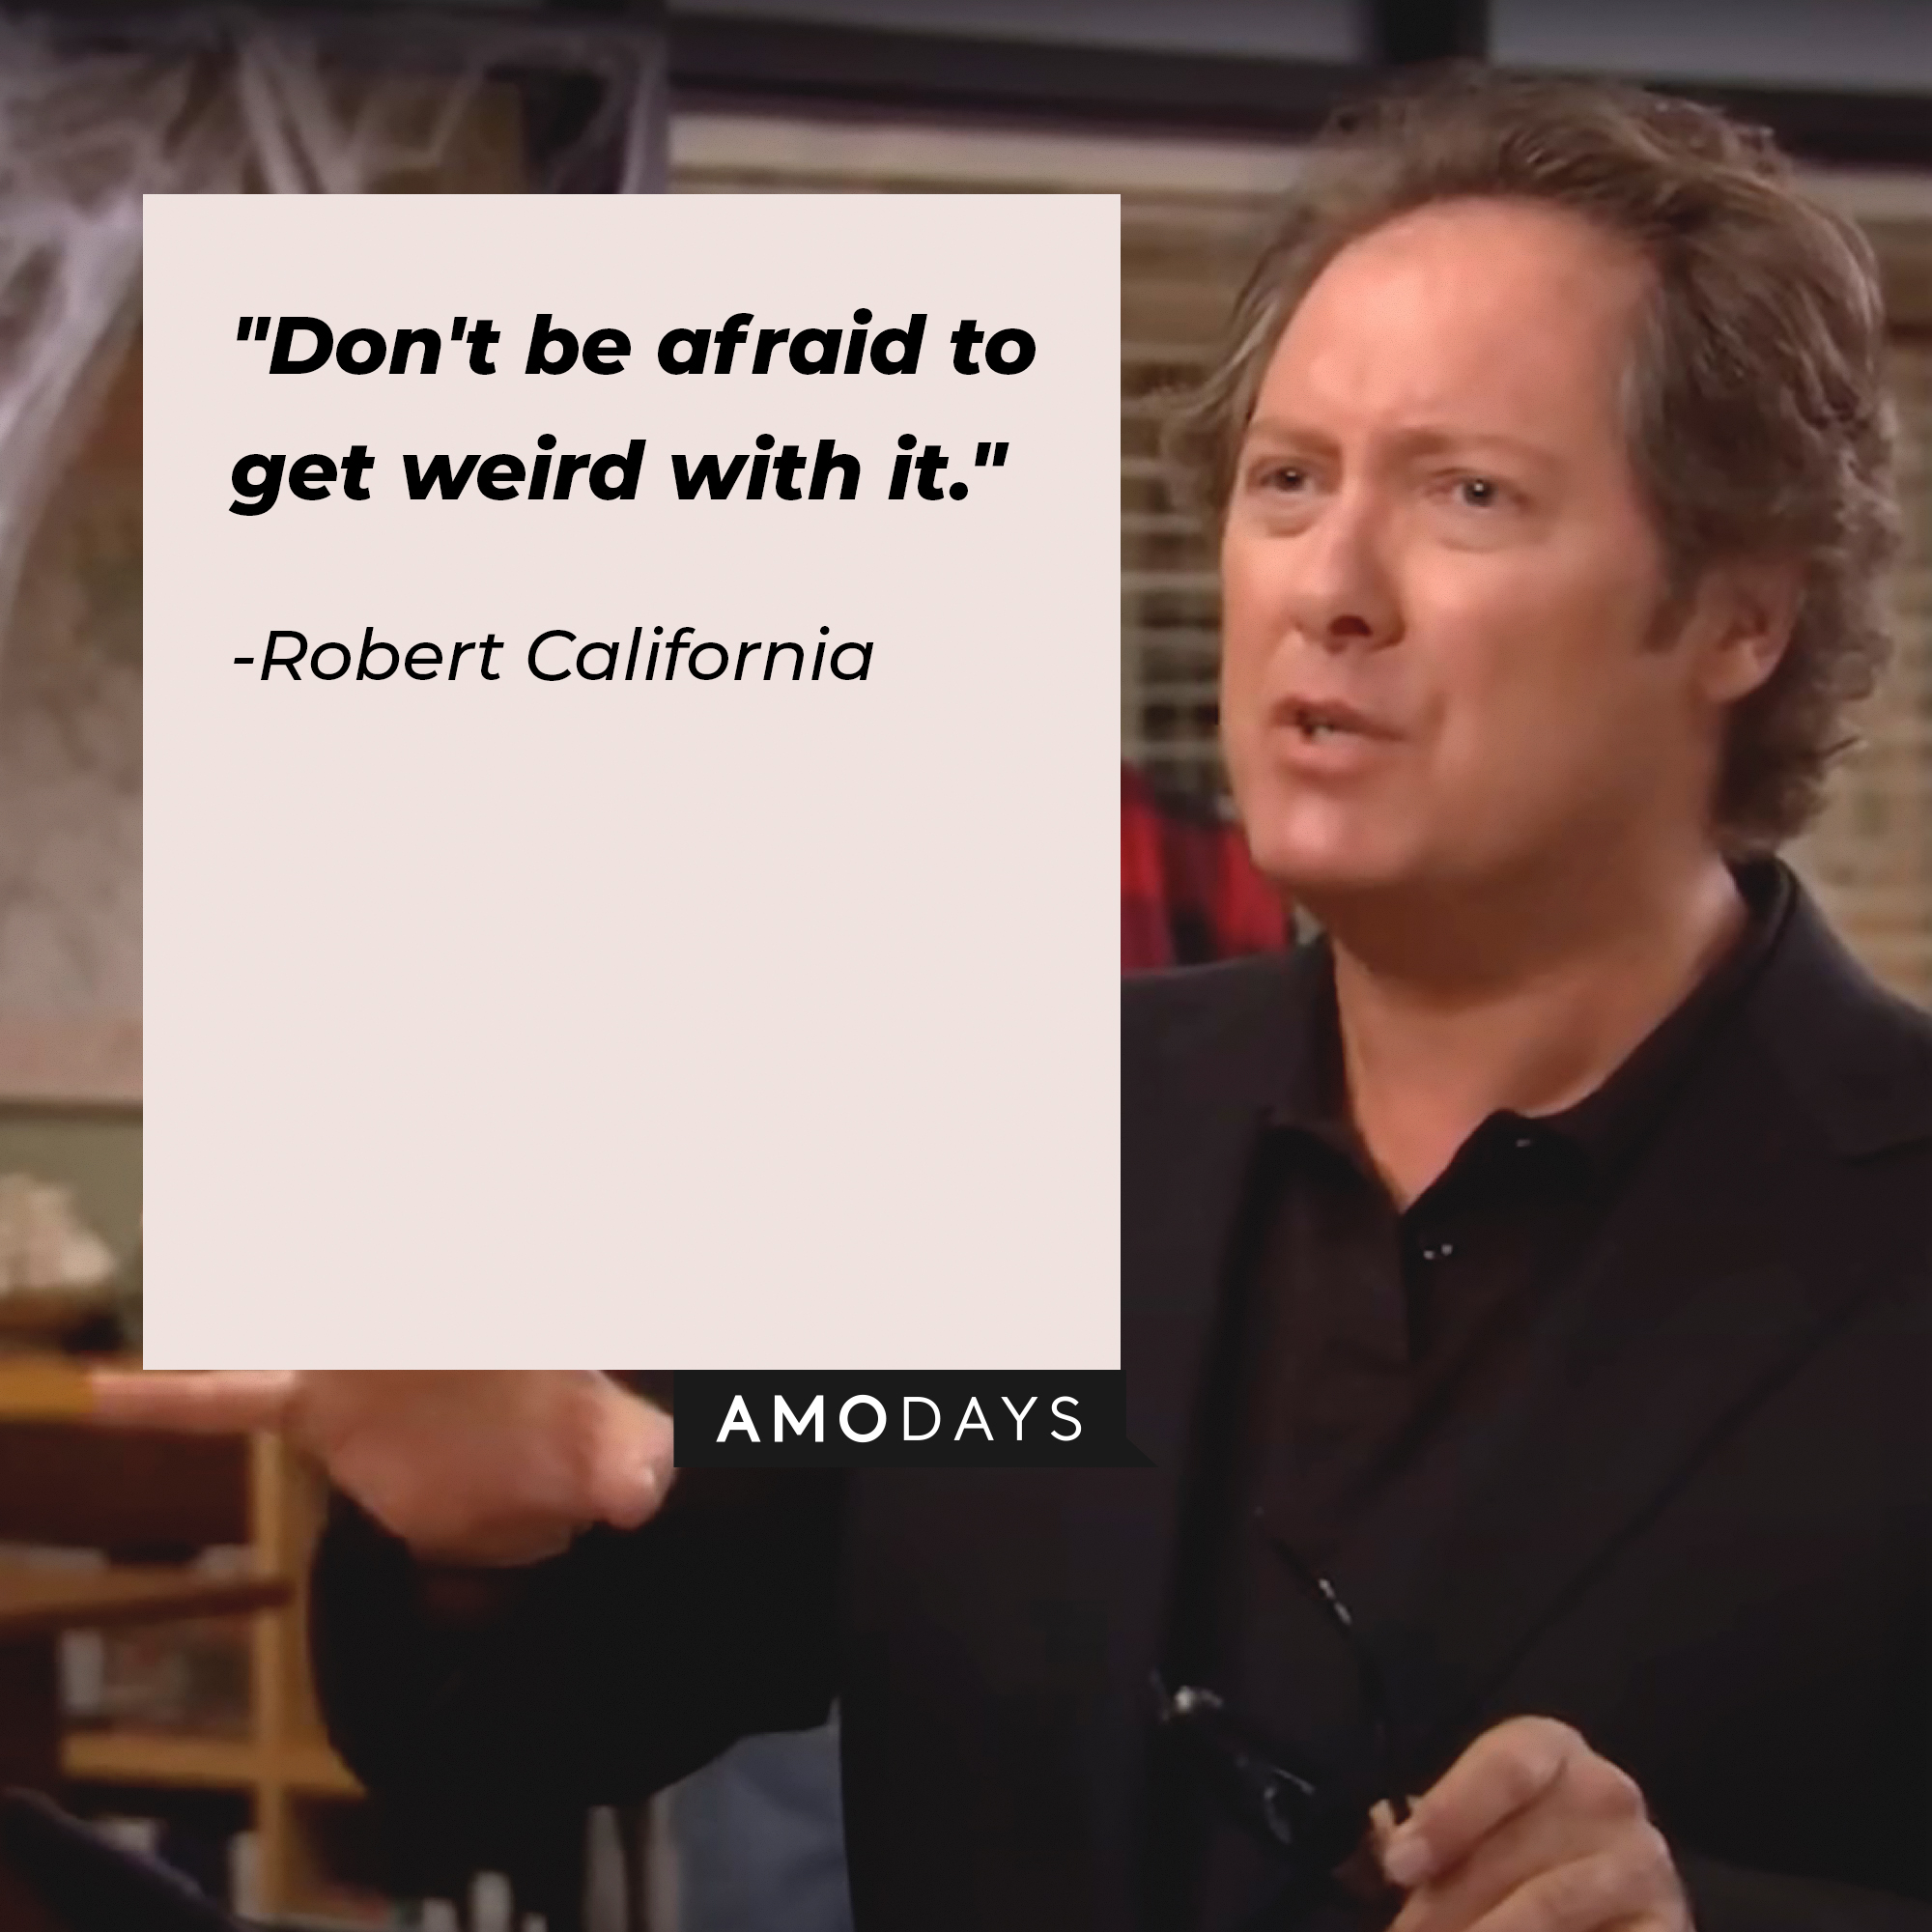 Robert California's quote: "Don't be afraid to get weird with it." | Image: AmoDays